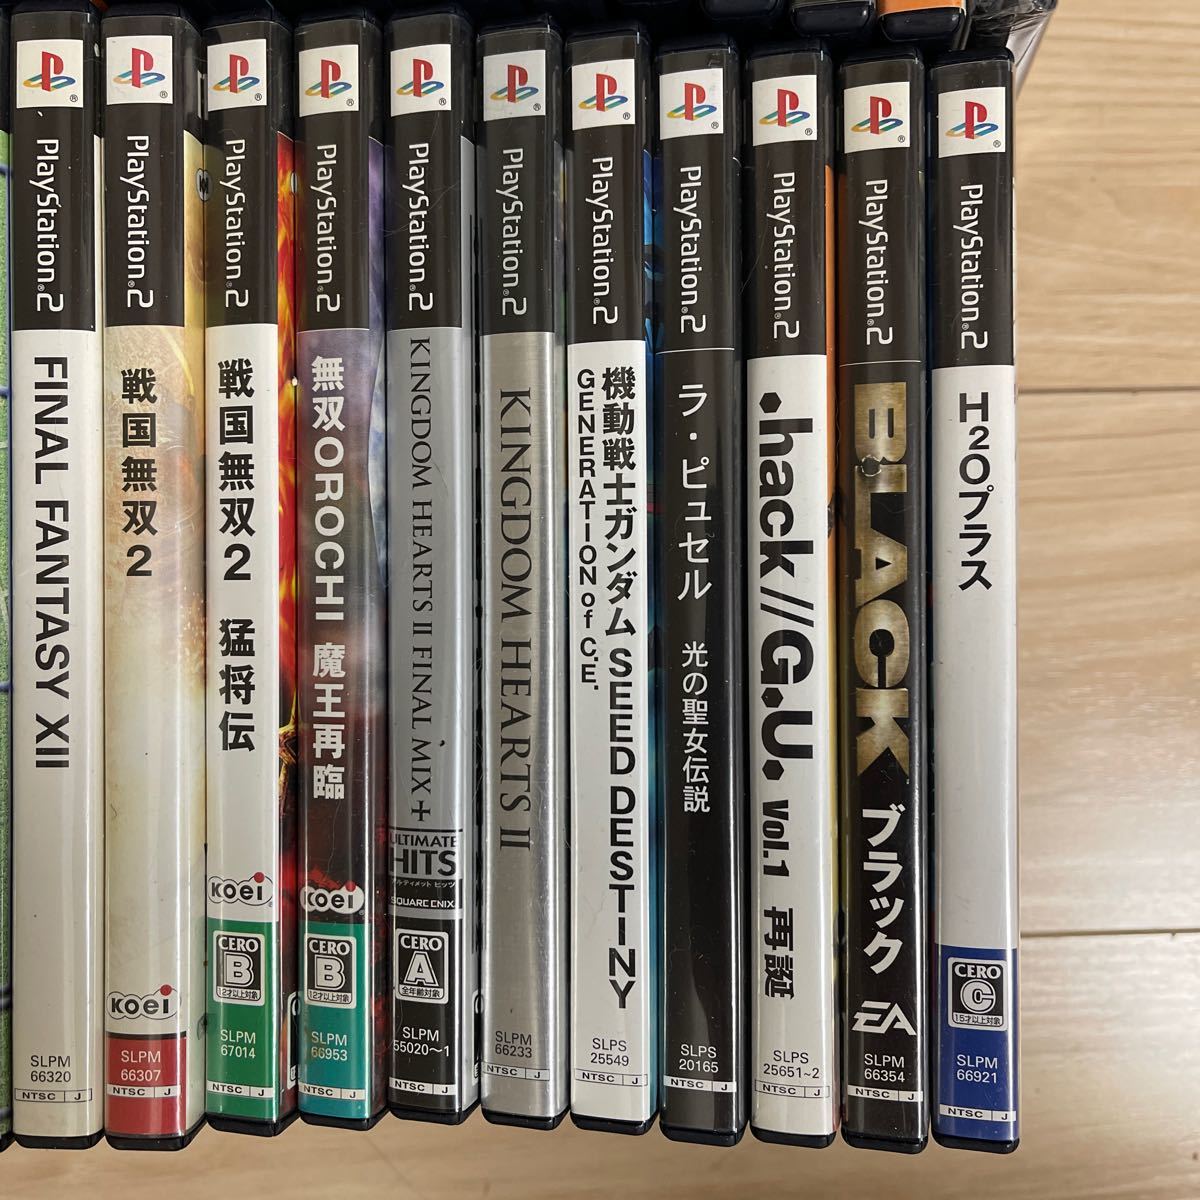 PS2 ソフト　50本　まとめ売り